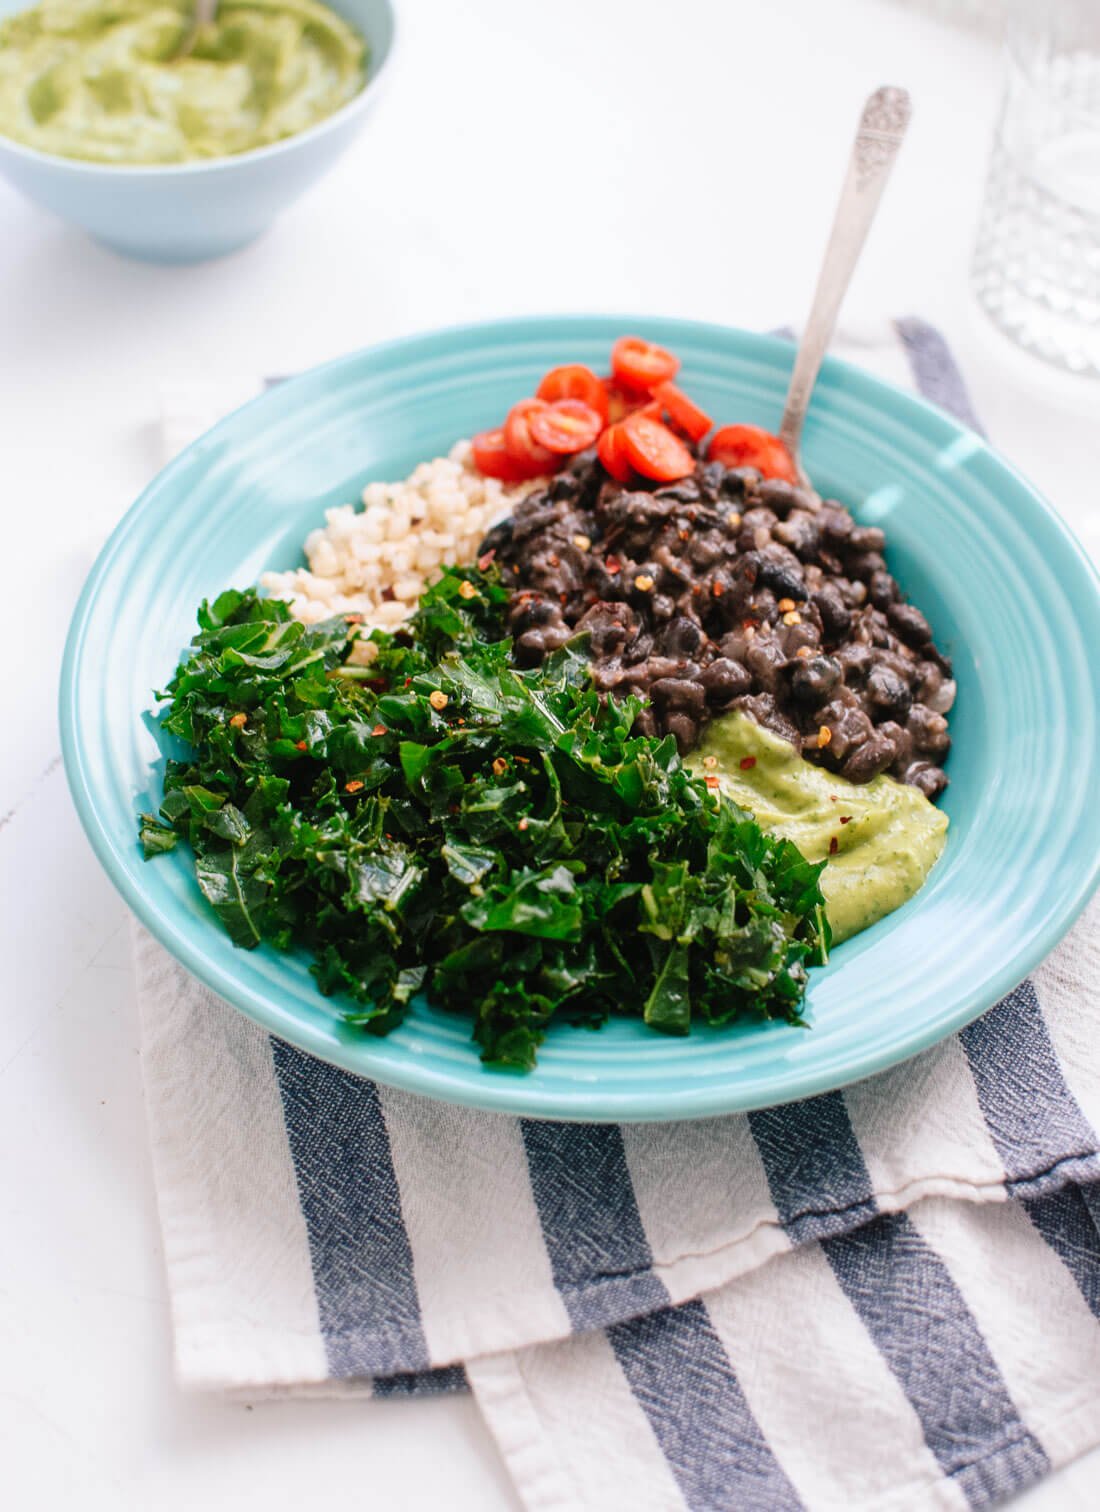 Kale black bean burrito bowls make a delicious, redeeming, vegan dinner that packs well for tomorrow's lunch. cookieandkate.com